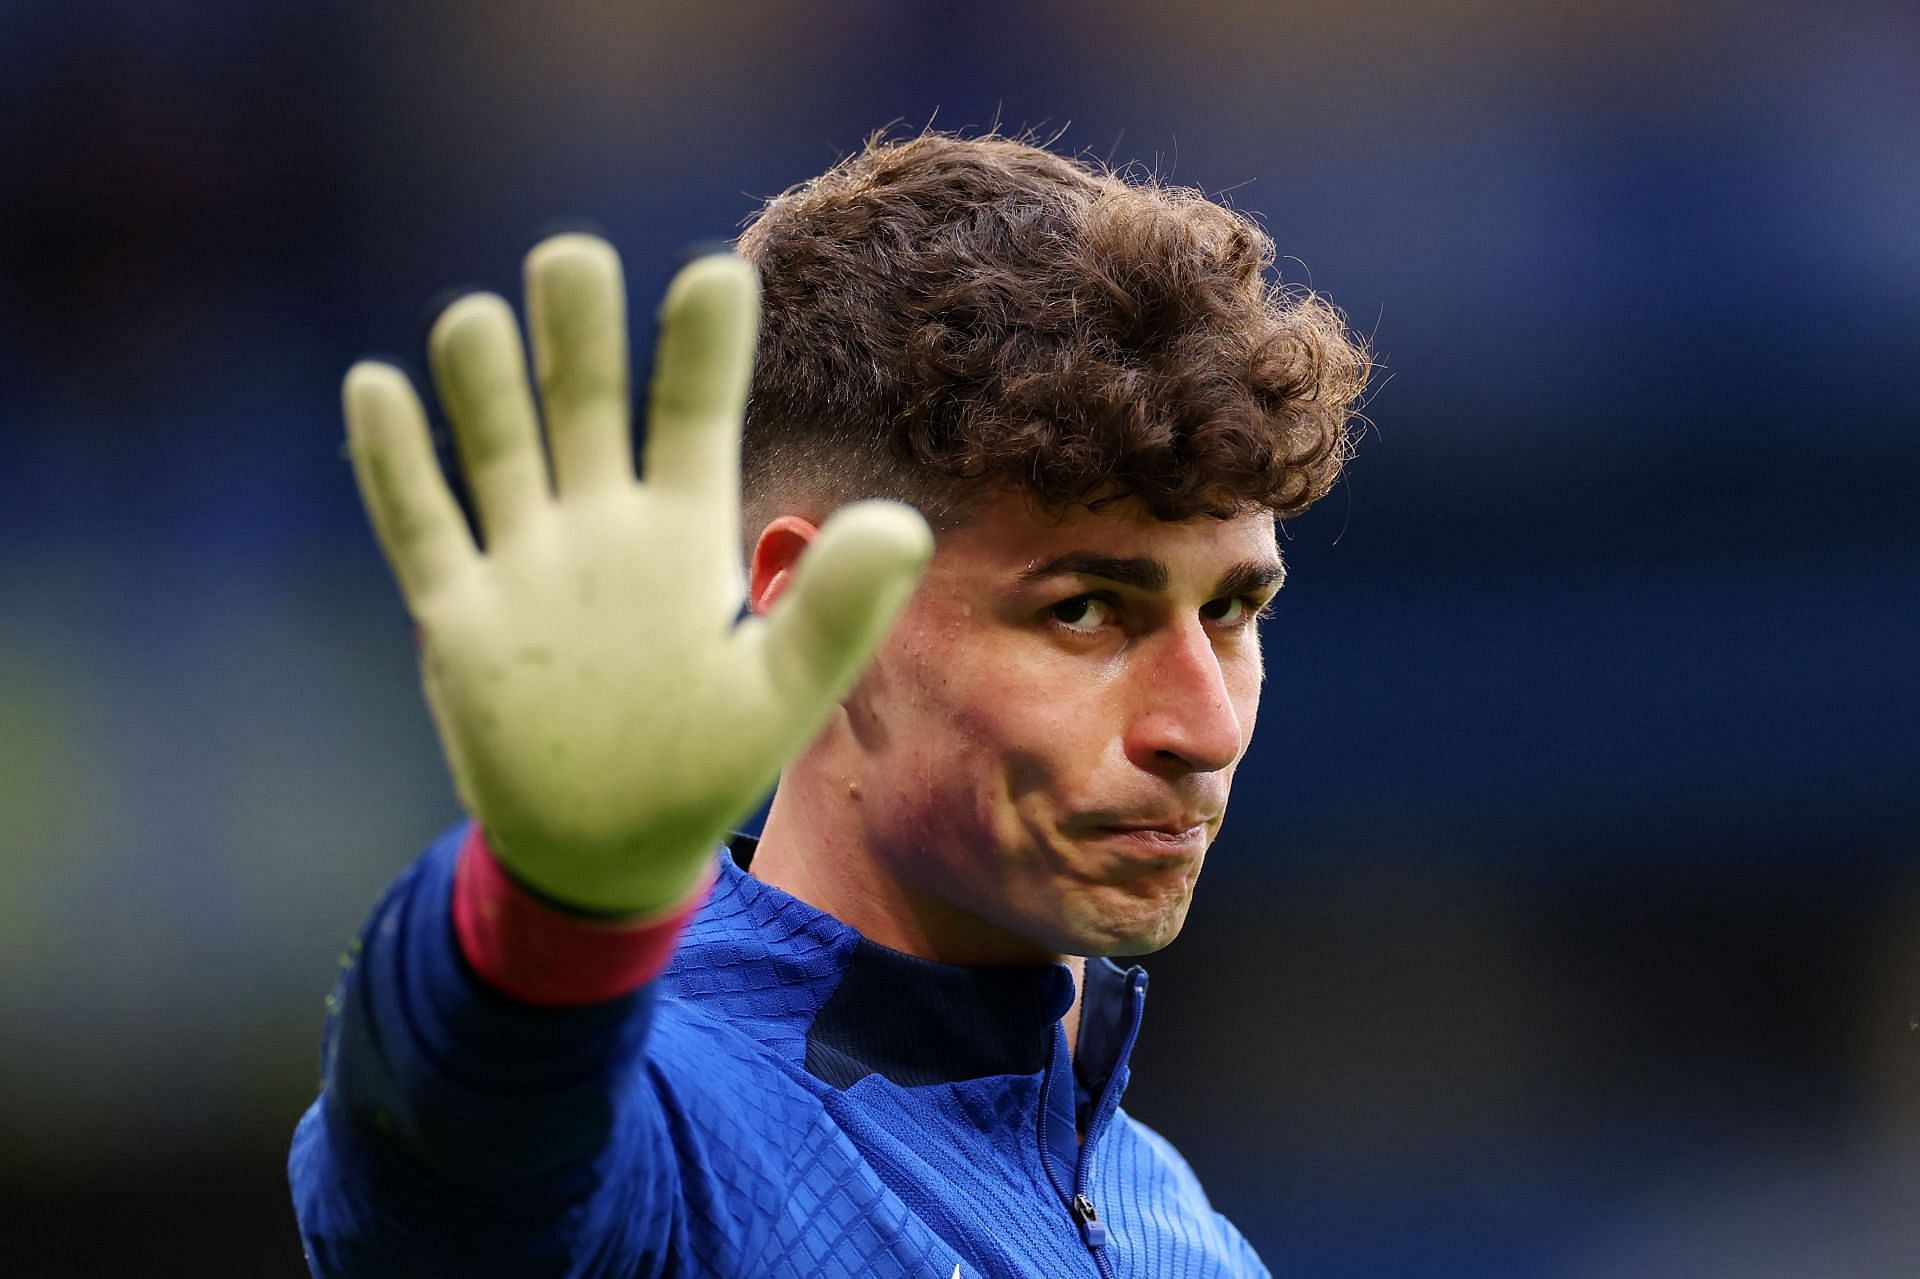 Chelsea could move for Maignan despite Kepa seemingly resuming the No.1 role.